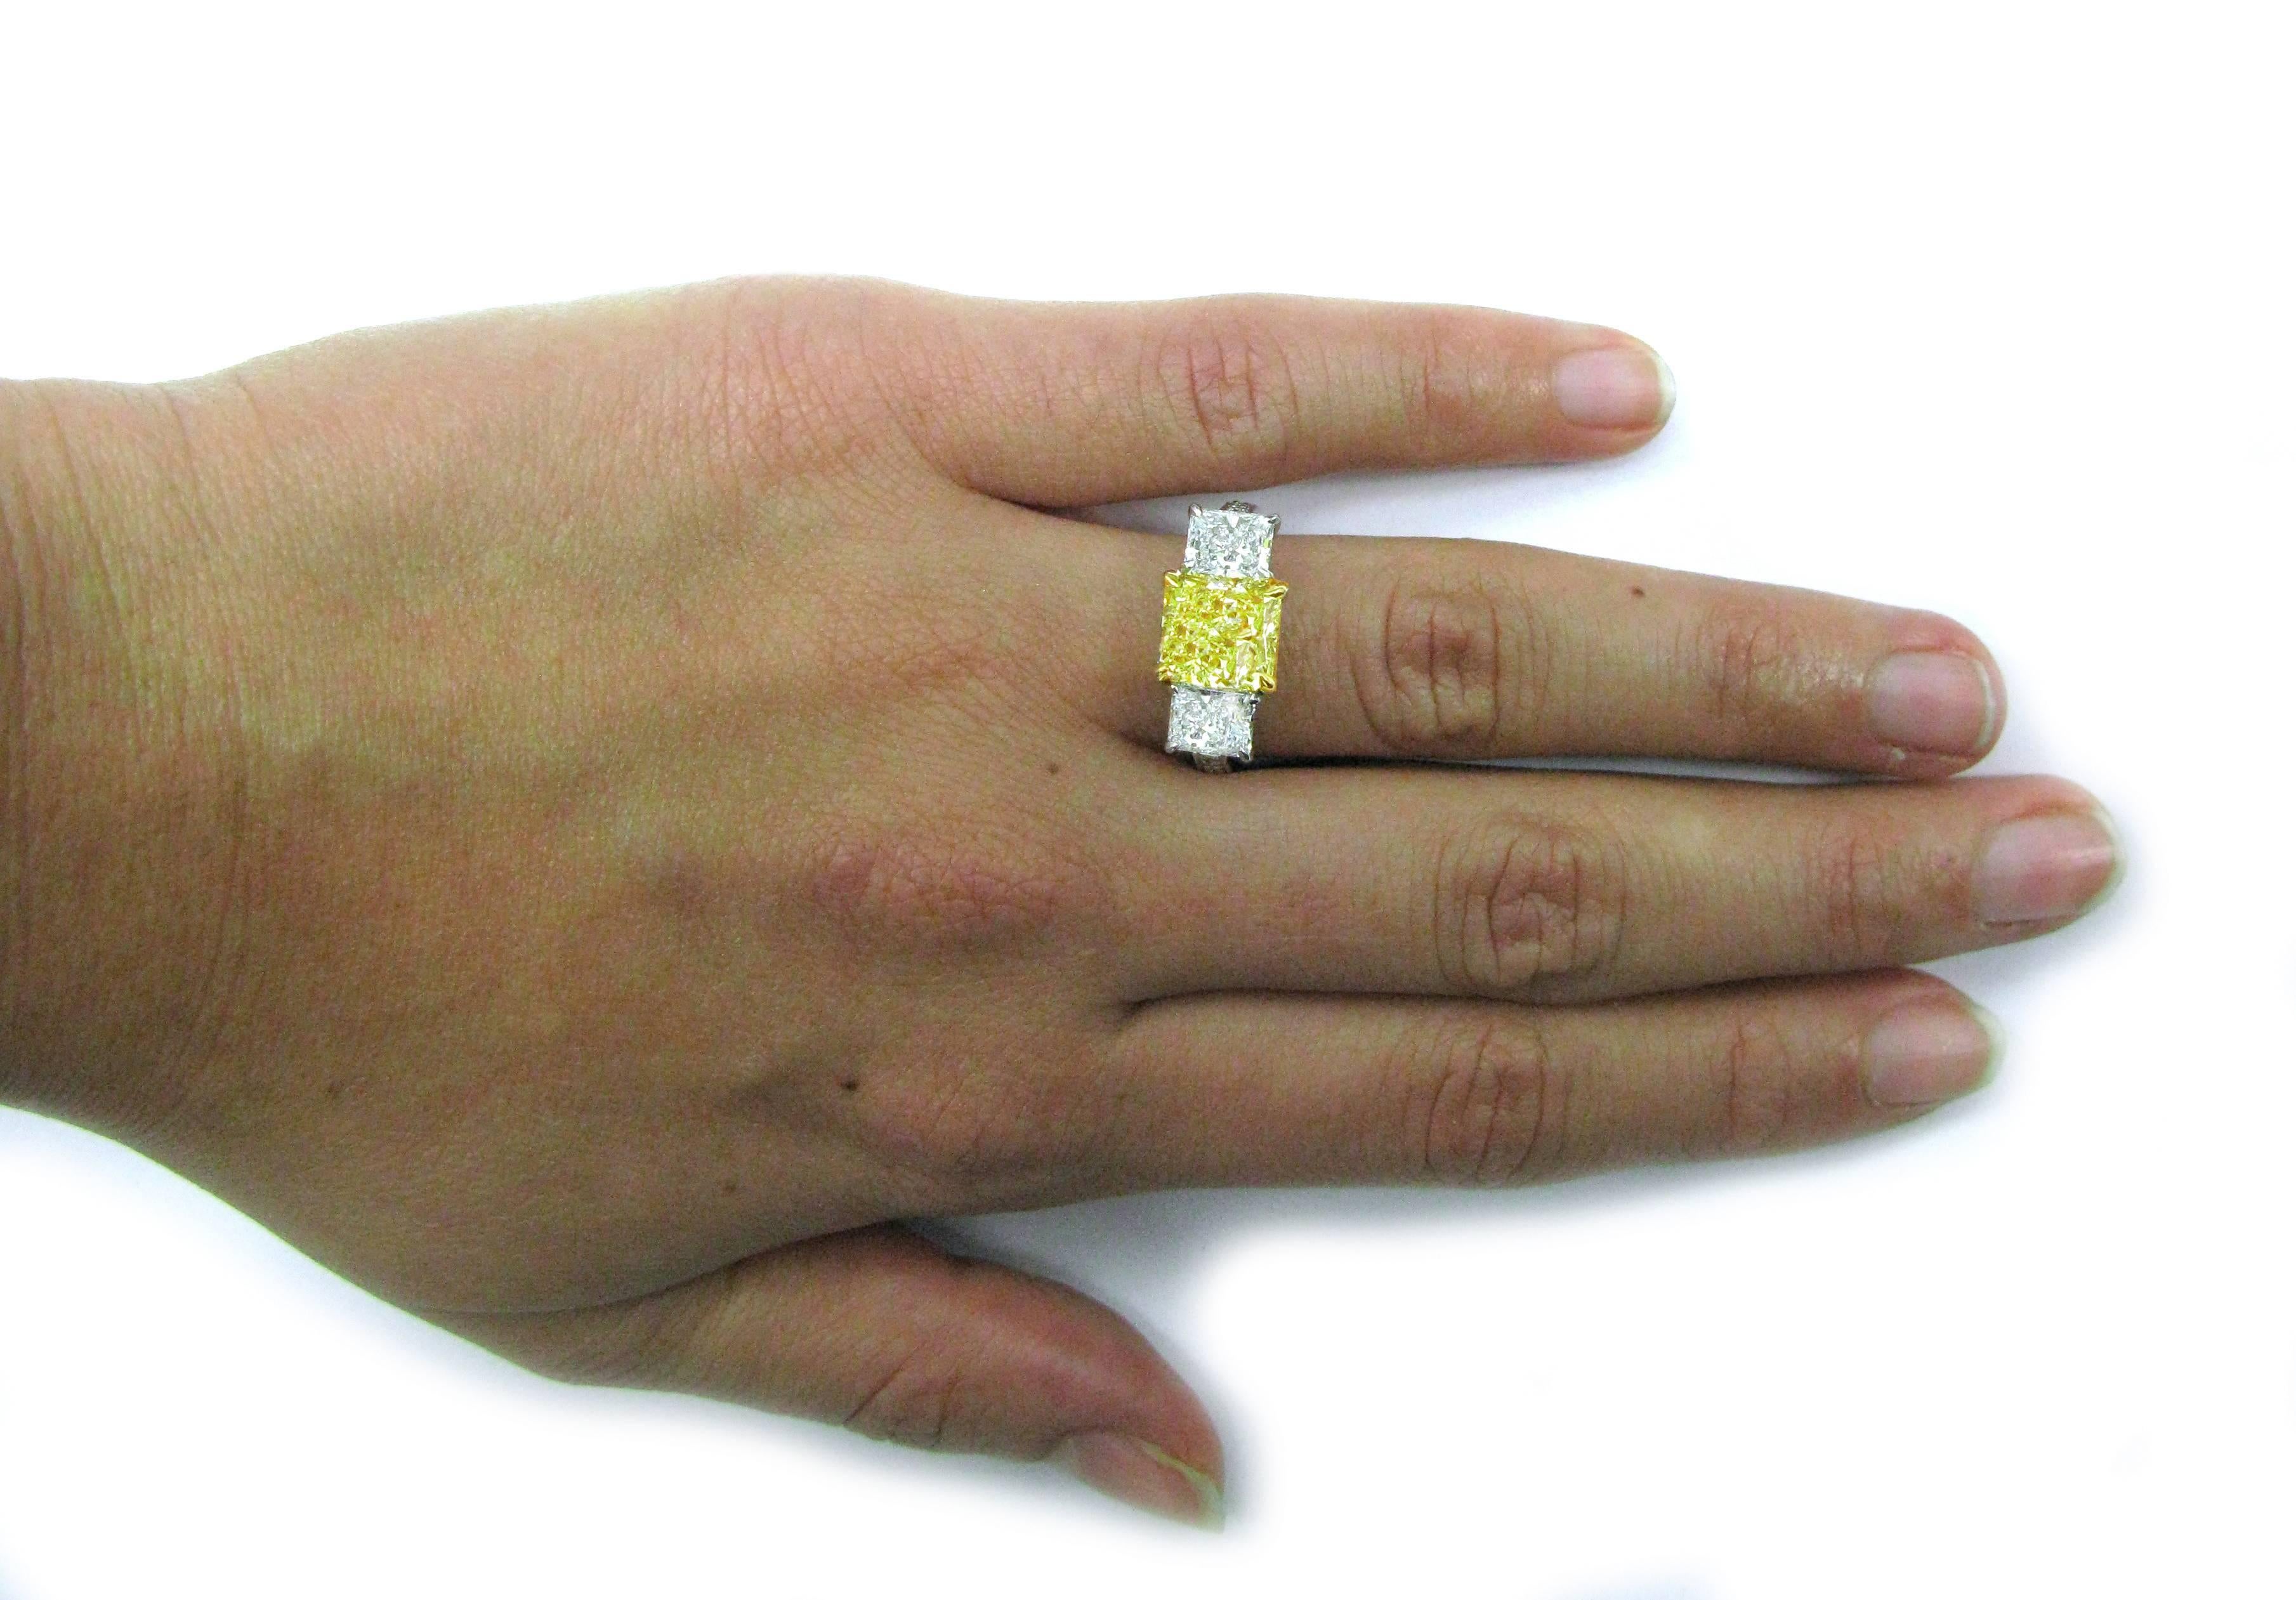 This lovely handmade 18kt yellow gold and platinum 3-stone diamond ring features a 2.51 carat, Fancy Yellow color, VVS2 clarity, radiant-cut diamond center stone with 1.48ctw, E/F color, VS clarity, Radiant cut diamond sidestones and 0.30ctw pave